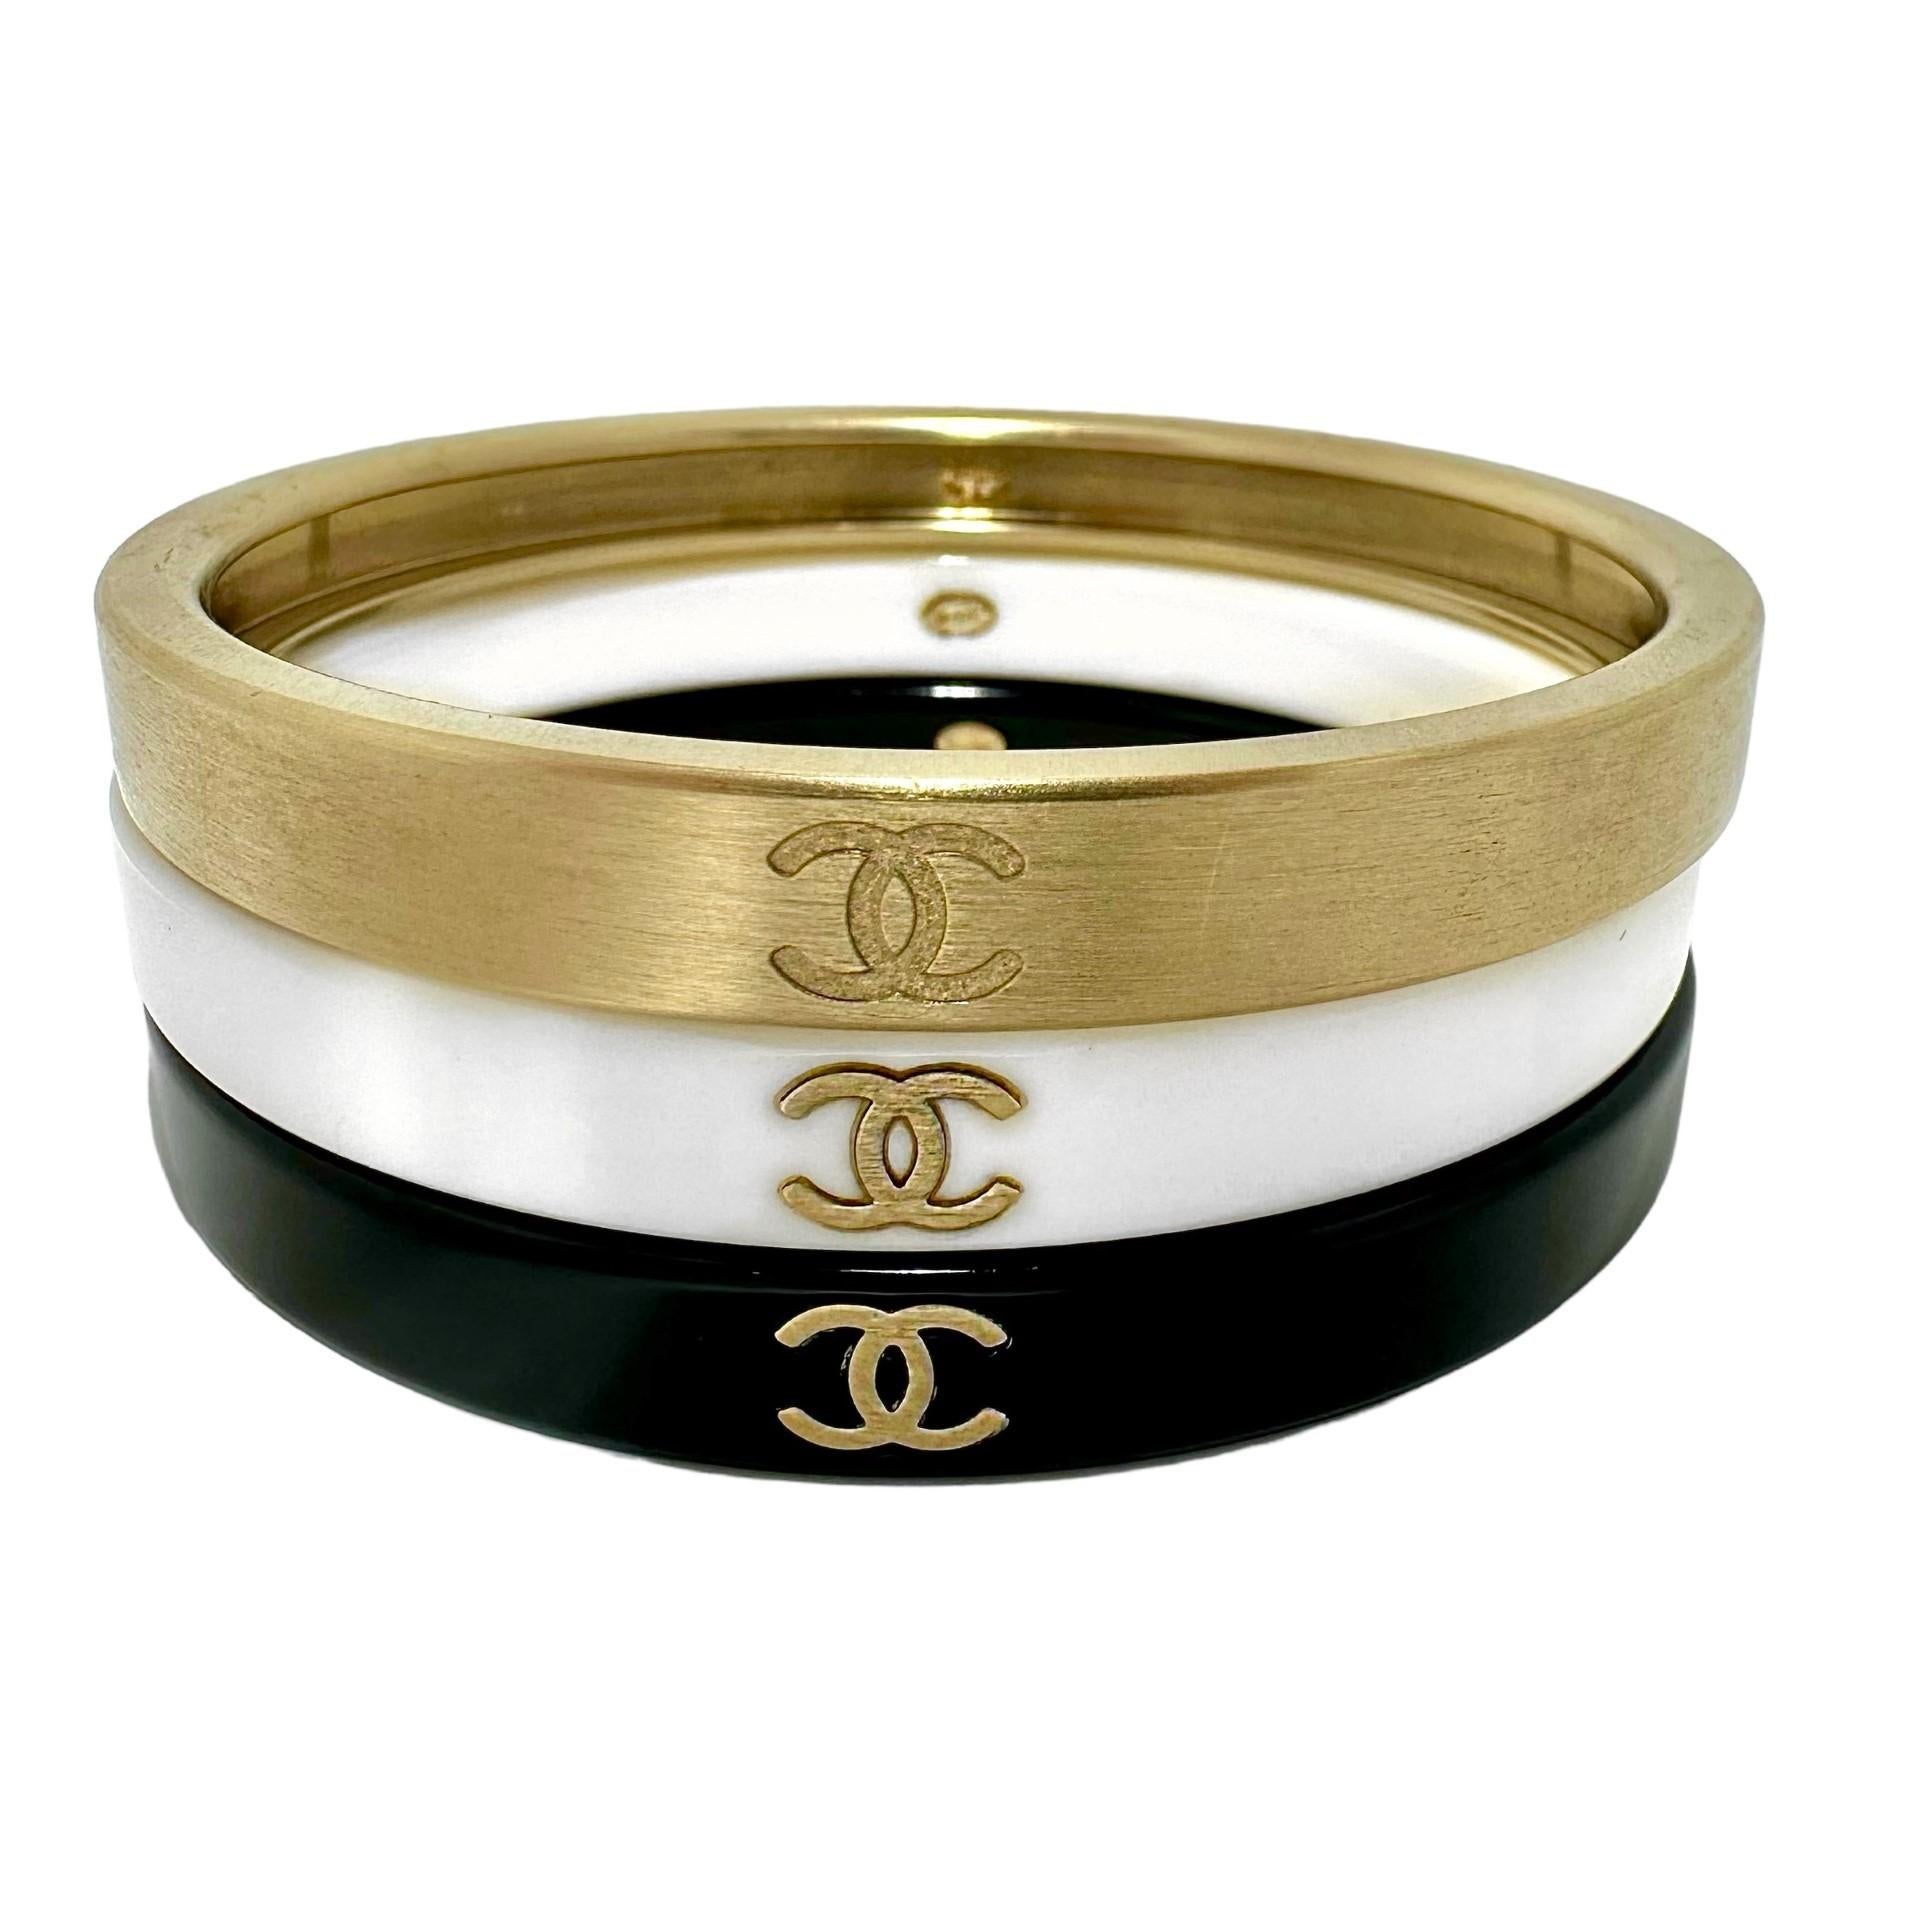 This wonderful, vintage Chanel set was released as part of the Autumn 2010 collection. Fabricated from Gold Tone brushed metal and resin. Each of the three bracelets is embossed with the CHANEL double C logo in three places. Inside each piece is a